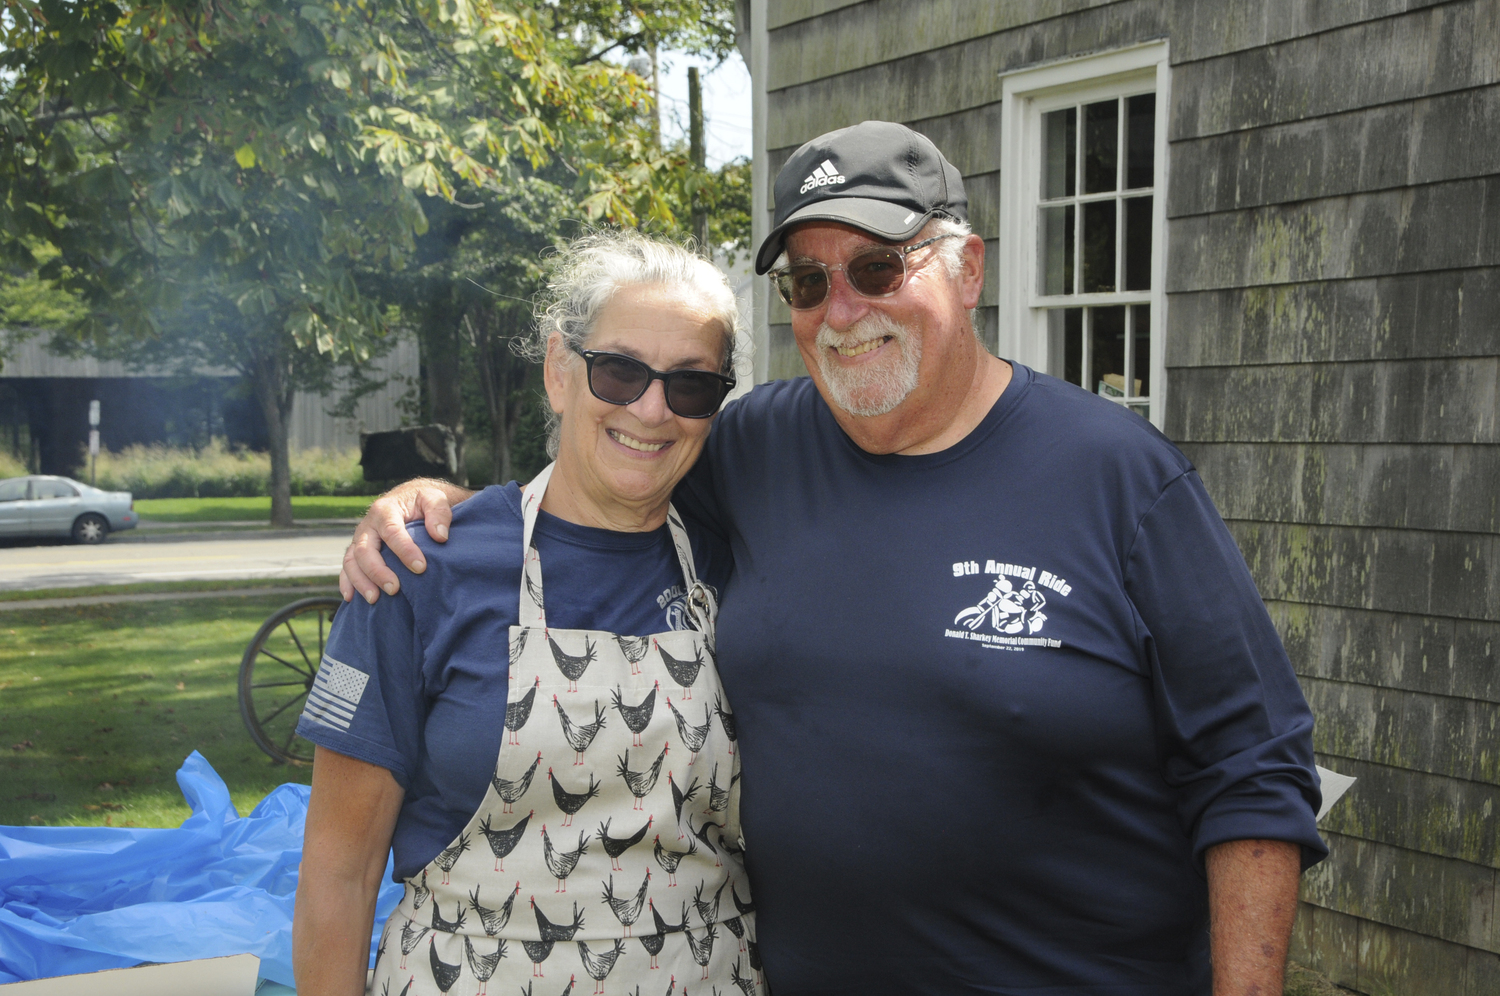 Patty and Tony Sales at the Farm to Table Dinner at the East Hampton Historical Farm Museum on Sunday afternoon.  RICHARD LEWIN